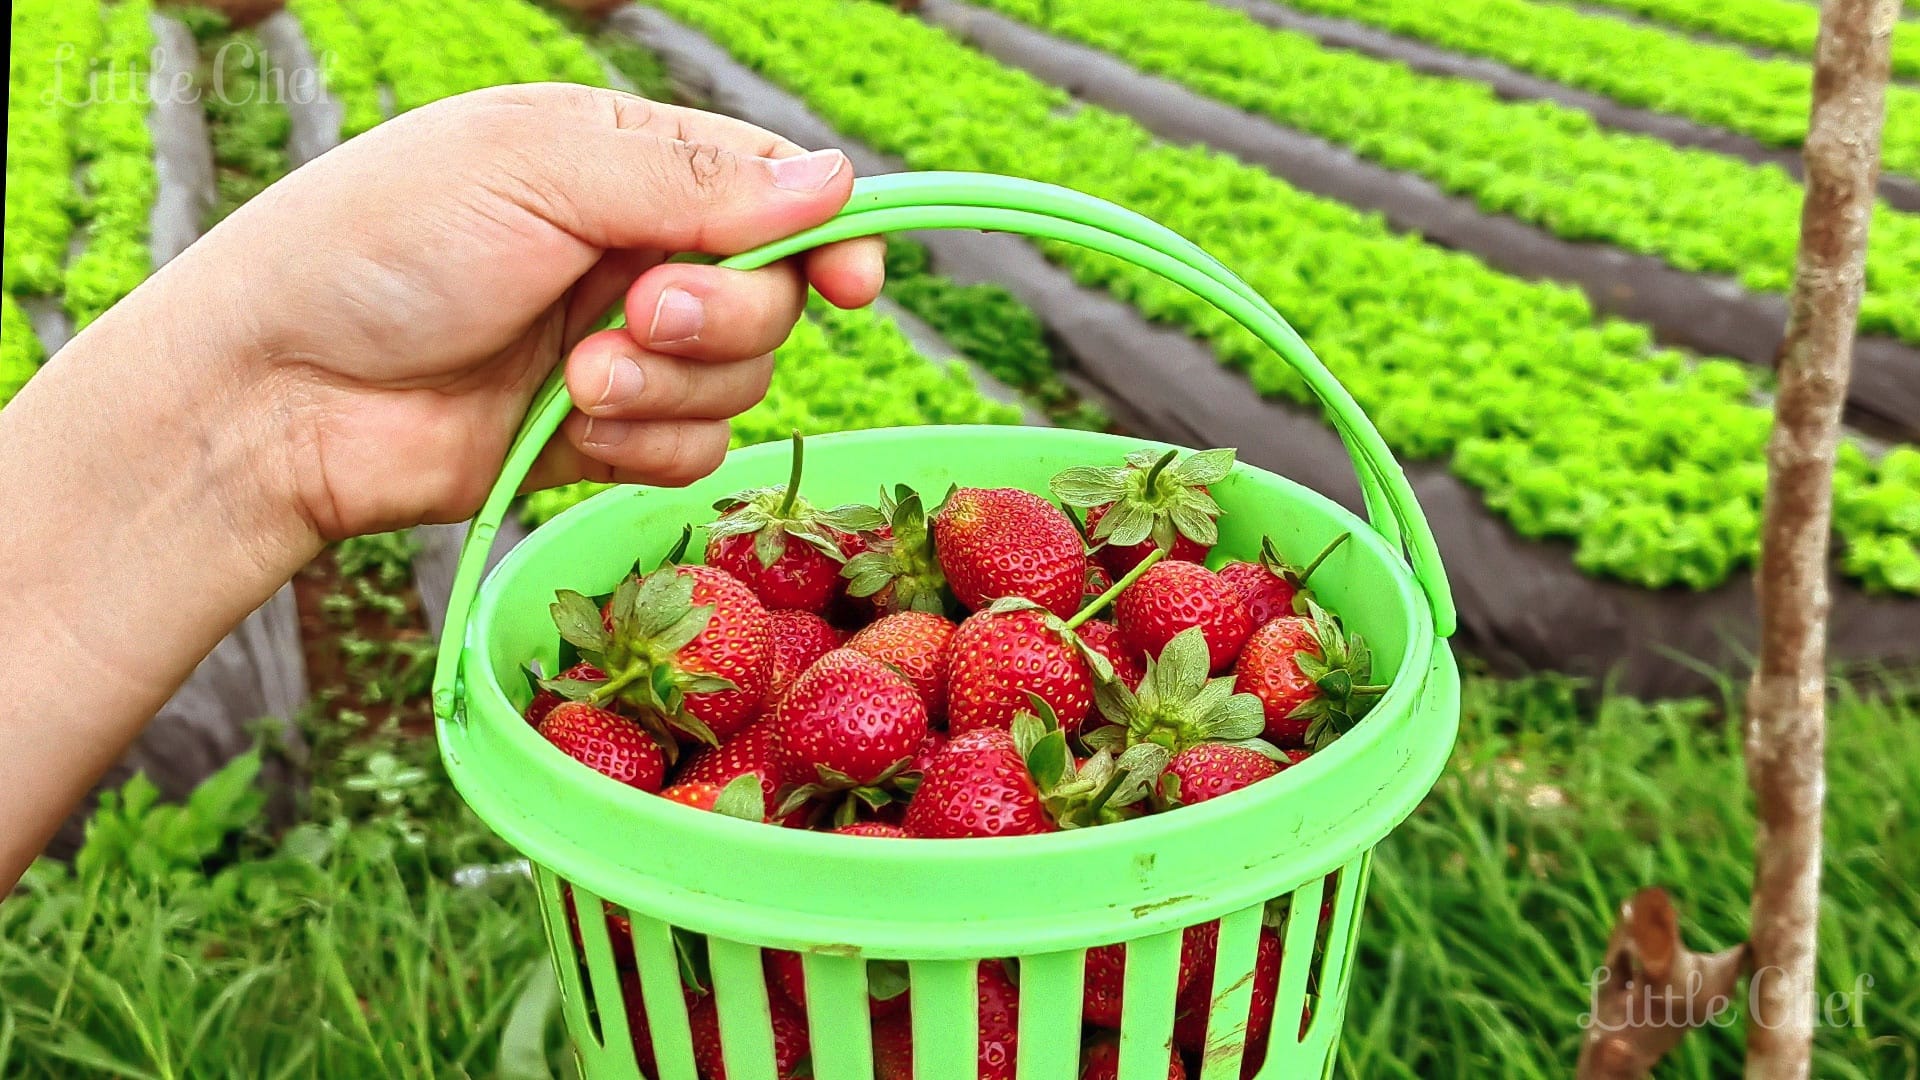 a person holding a basket full of strawberries.